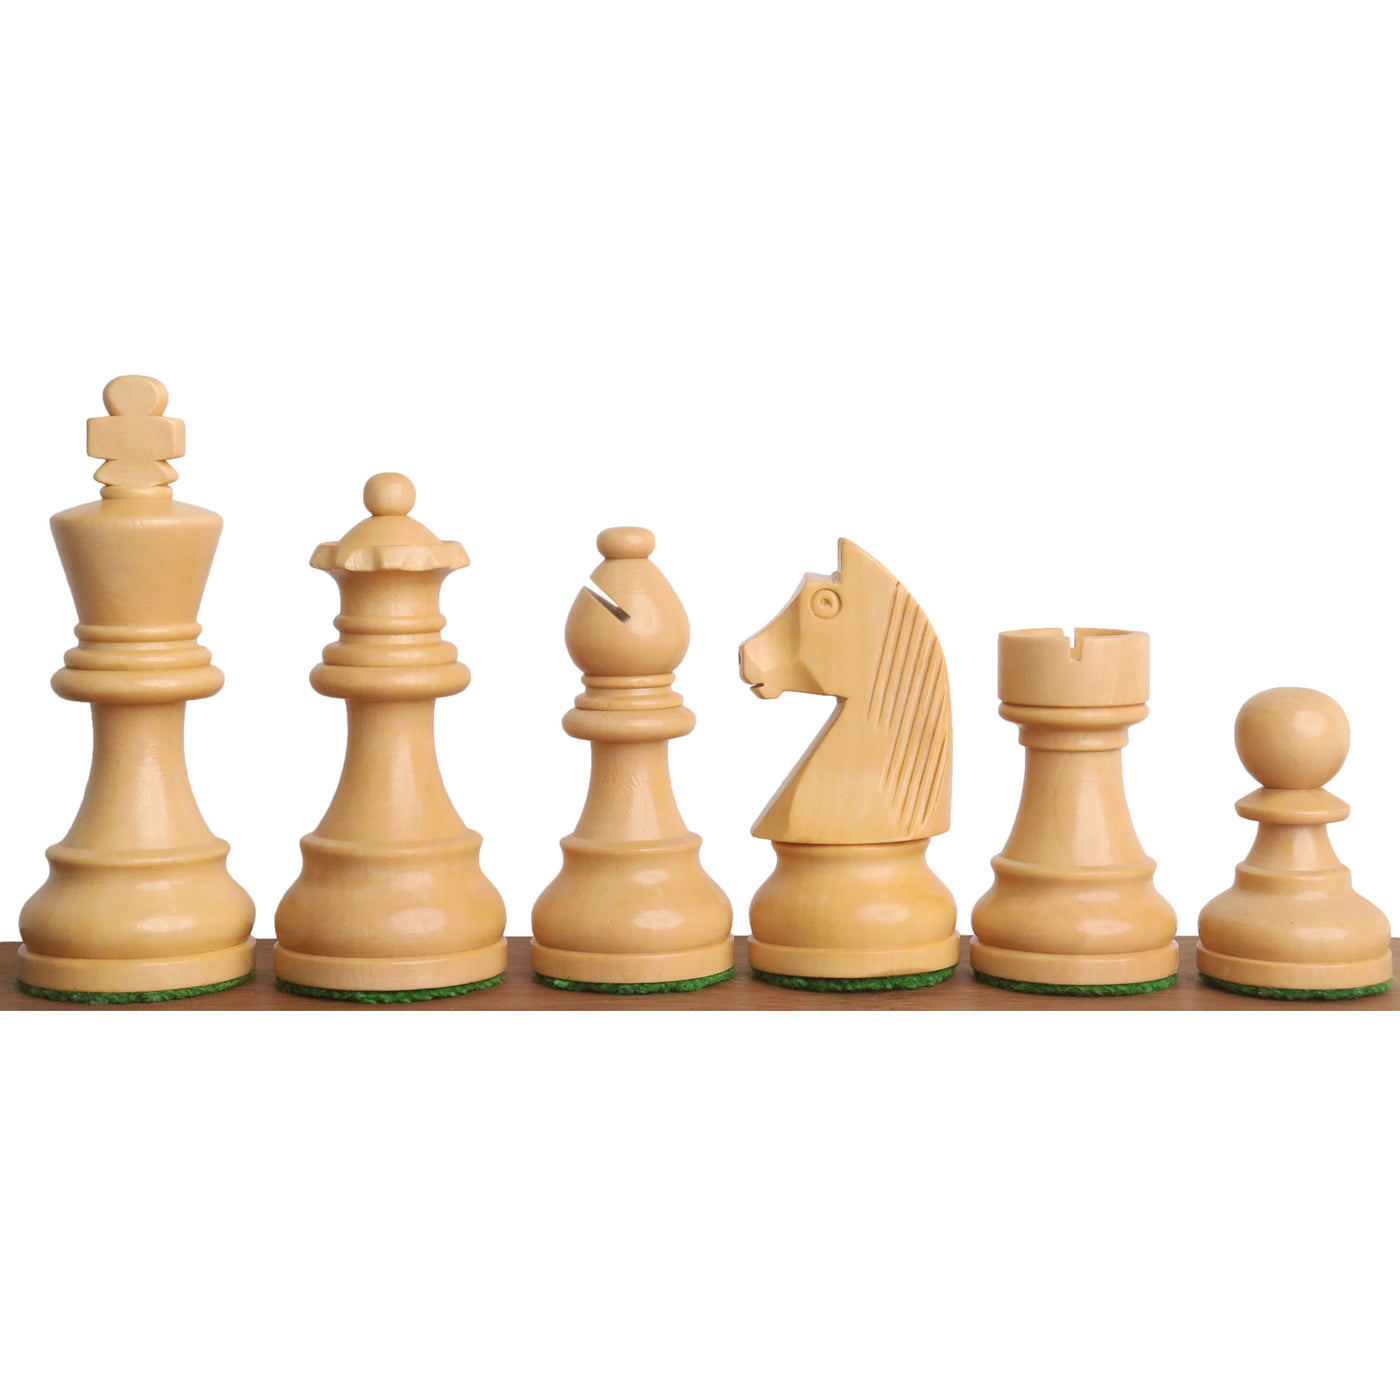 3.3" Tournament Staunton Chess Set - Chess Pieces Only - Ebonised Boxwood- Compact size